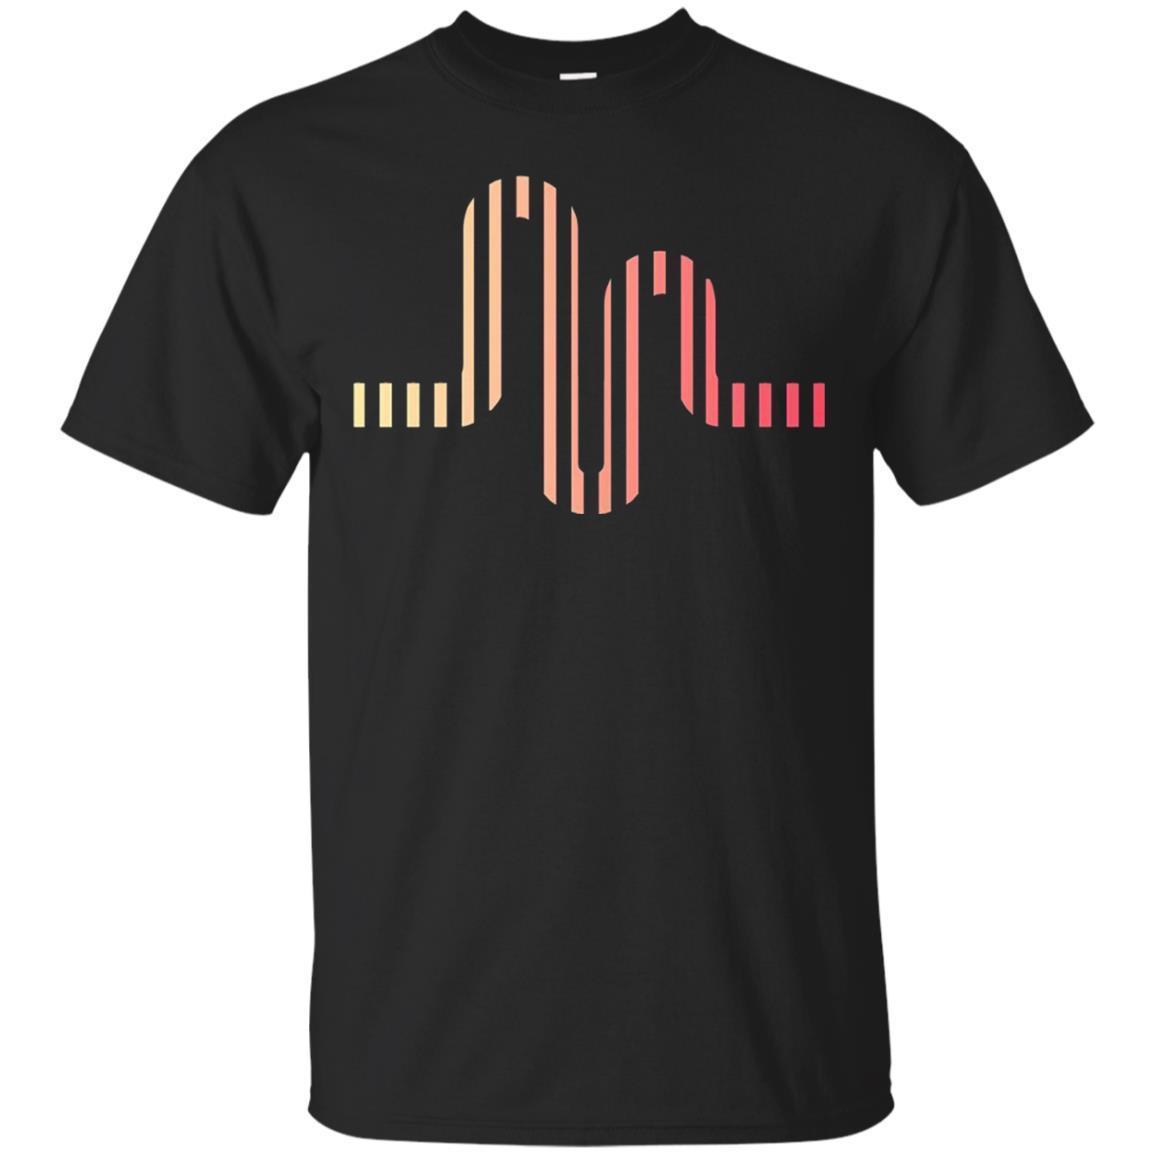 Melody Wave Musical.ly T-shirt (fitted Cut) T-shirt - Amyna